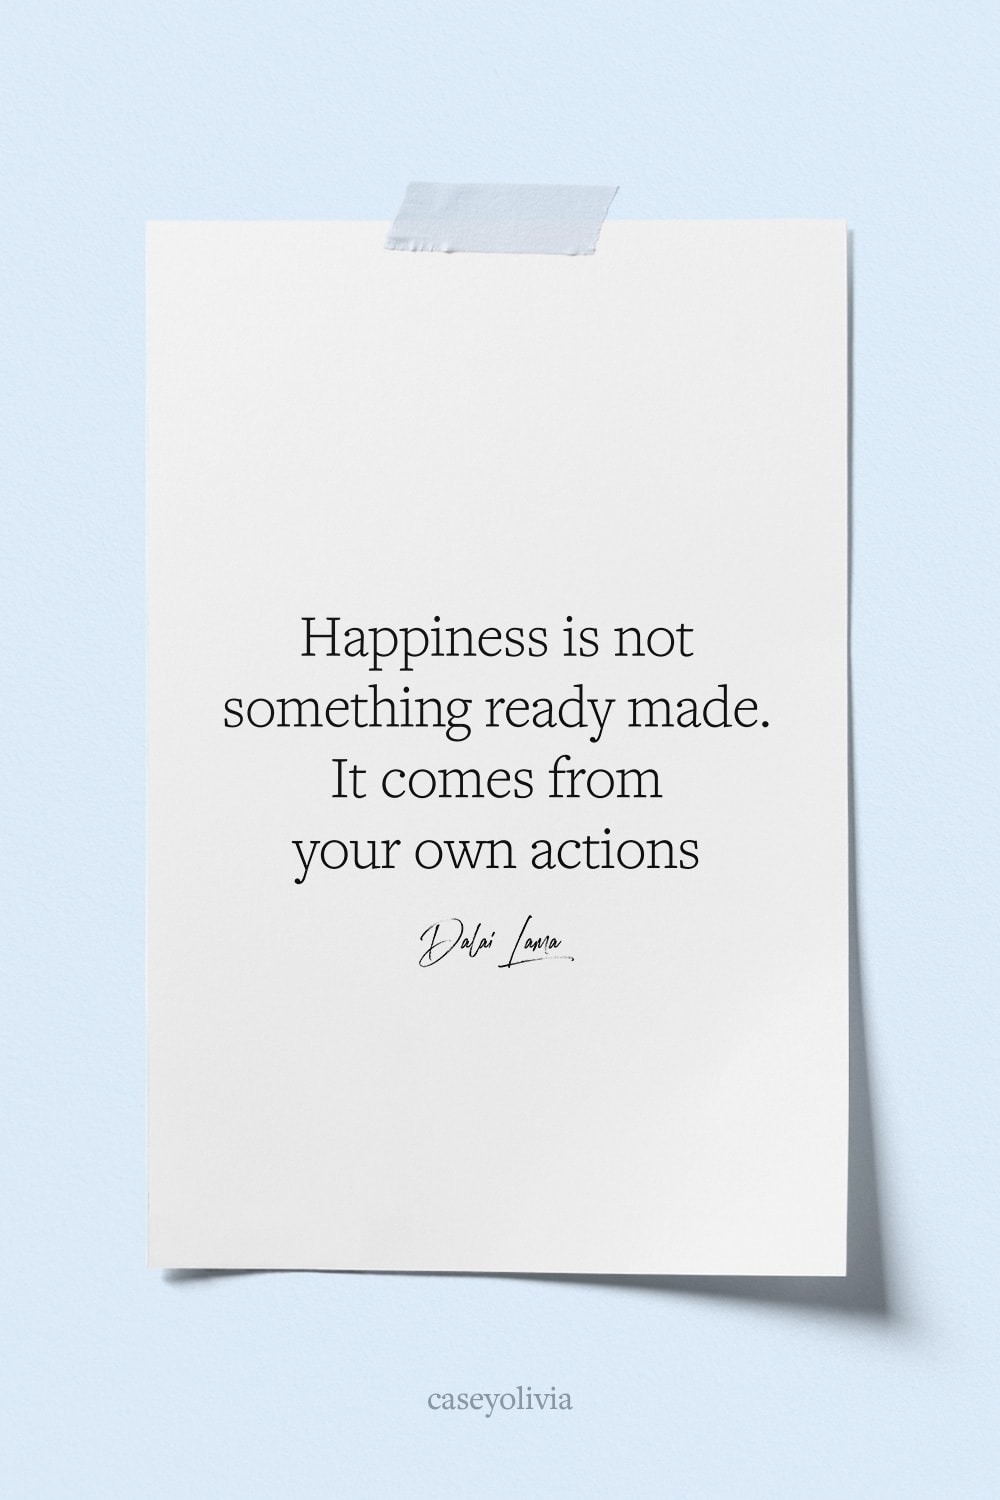 happiness comes from within quote to print from dalai lama